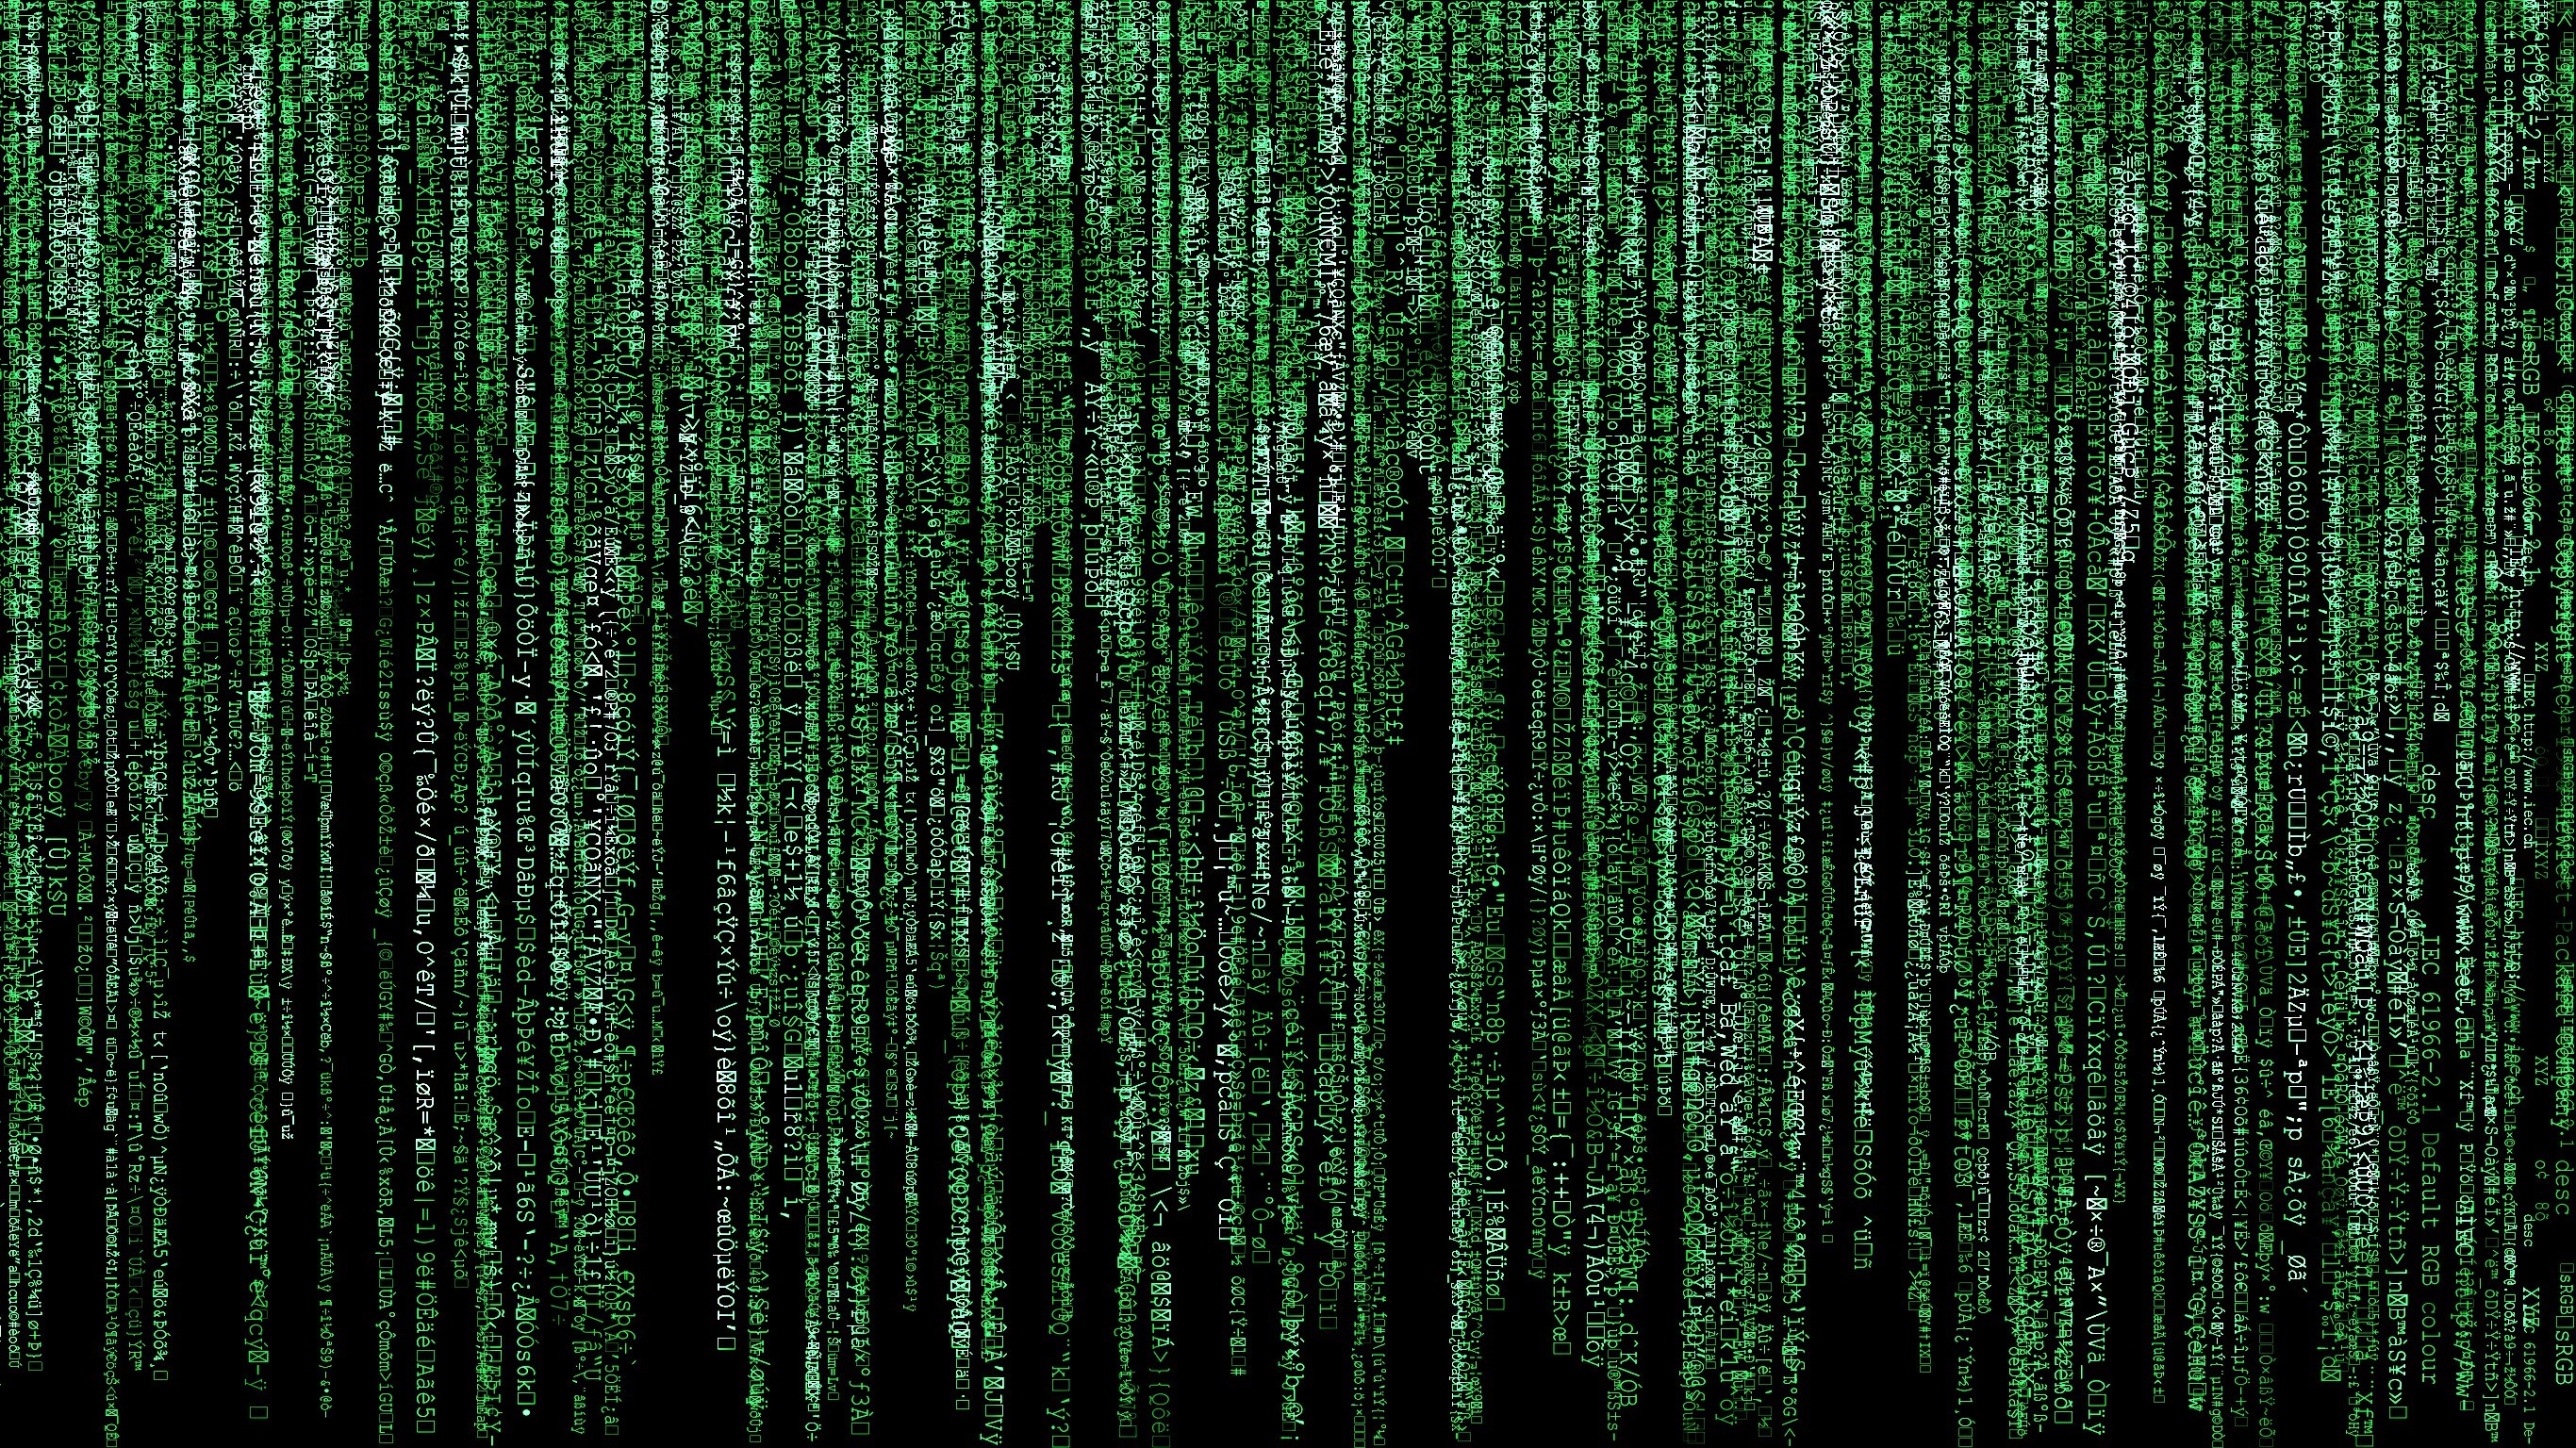 Free Download Matrix Wallpapers Hd Full Hd Pictures 2732x1536 For Your Desktop Mobile Tablet Explore 76 Matrix Wallpaper Hd The Matrix Wallpaper